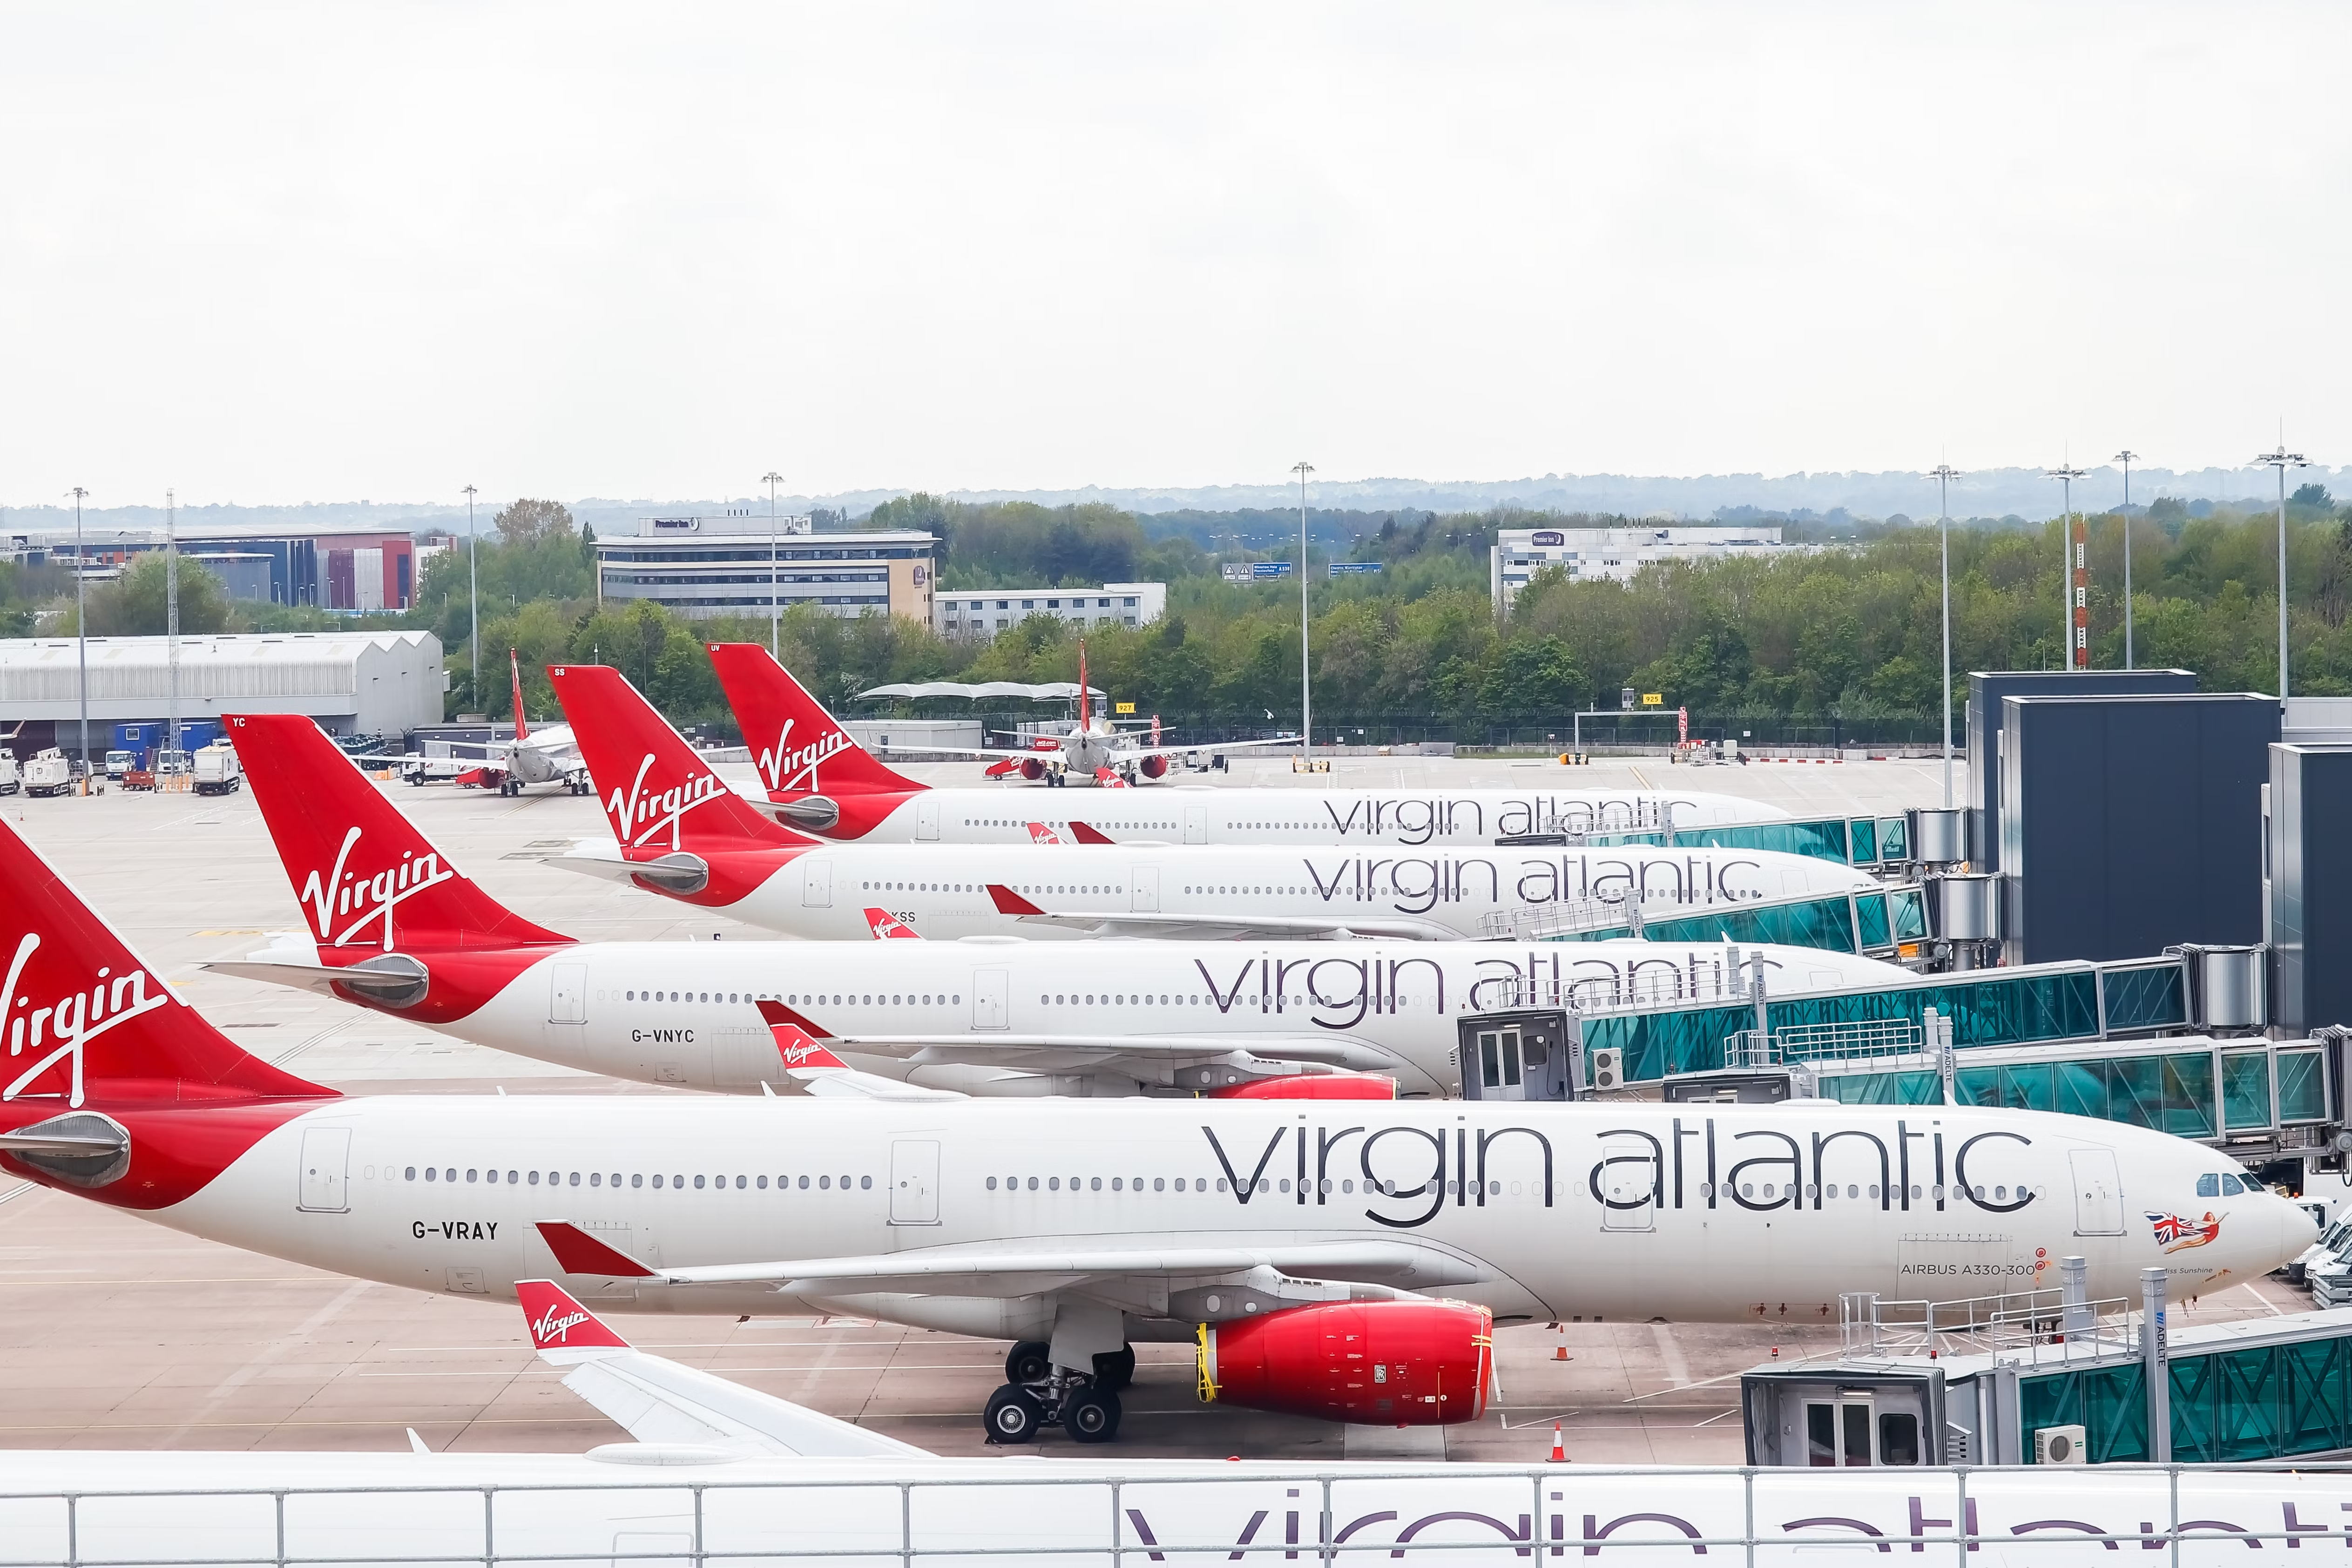 Many Virgin Atlantic Airbus A330s parked side by side.